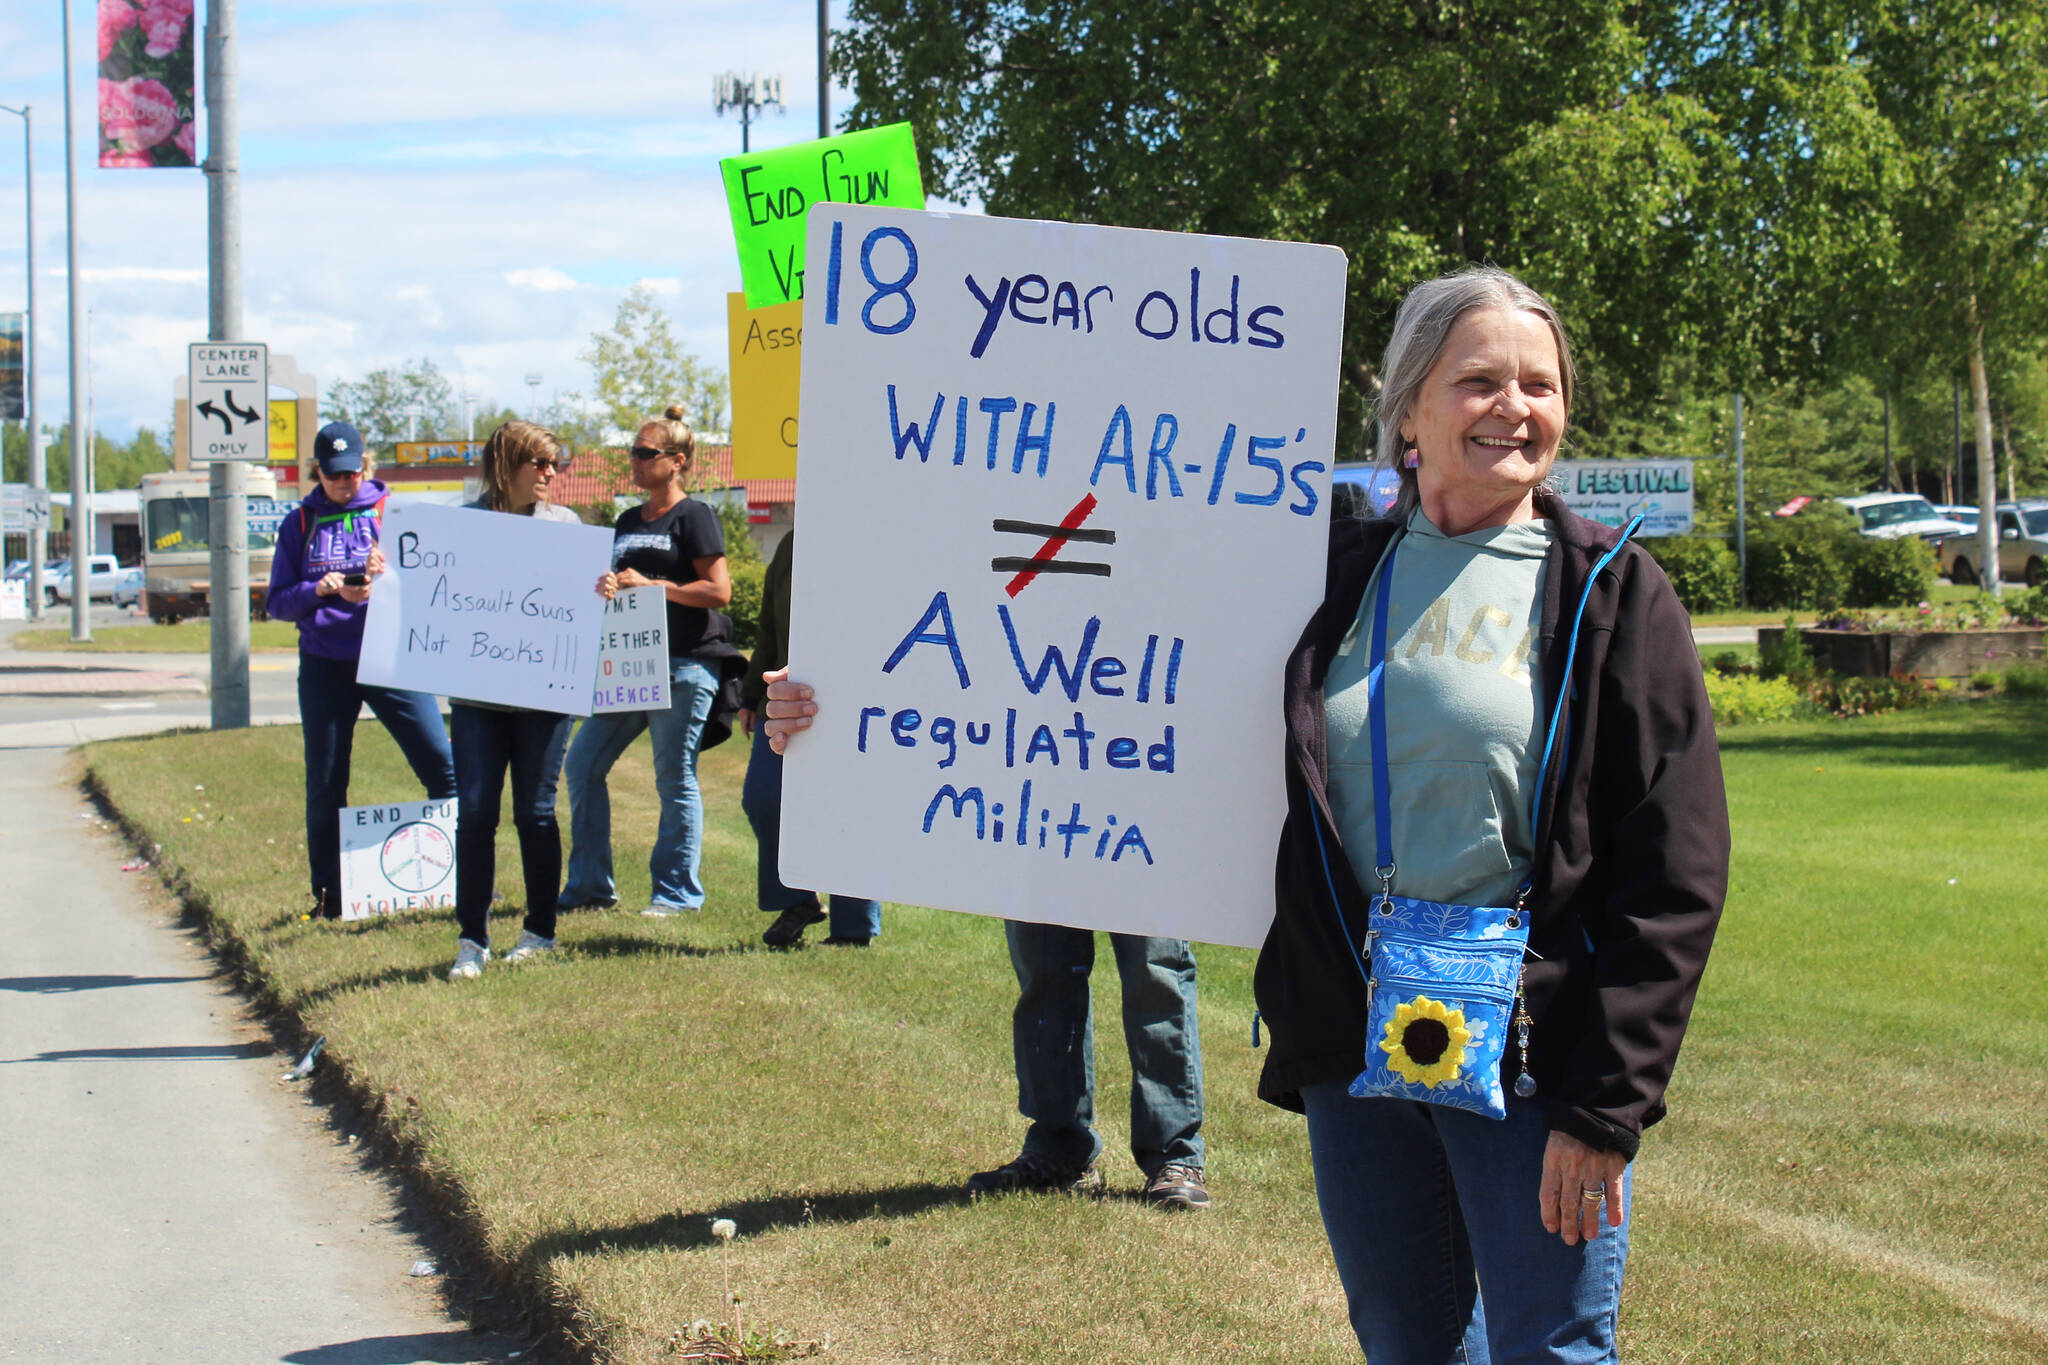 Fay Herold of Seward holds a sign during a demonstration opposing gun violence on Saturday, June 11, 2022, in Soldotna, Alaska. The local protest was part of a nationwide call to action issued by the nonprofit organization March for Our Lives, which was formed after a 2018 school shooting in Parkland, Florida, and aims to end gun violence. (Ashlyn O’Hara/Peninsula Clarion)